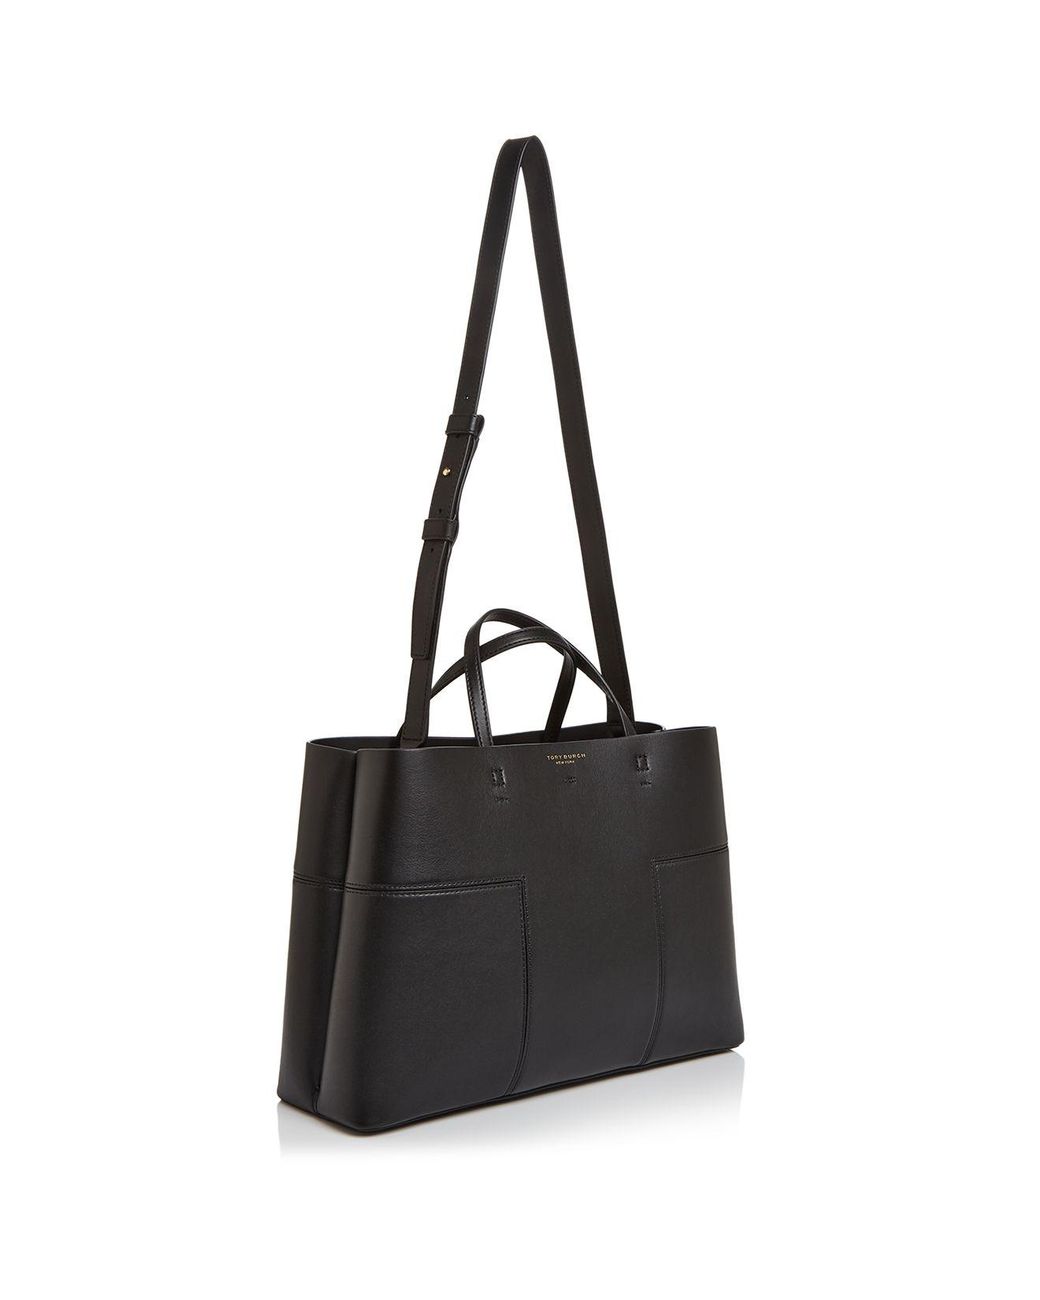 Tory Burch Block-t Triple Compartment Leather Tote in Black | Lyst